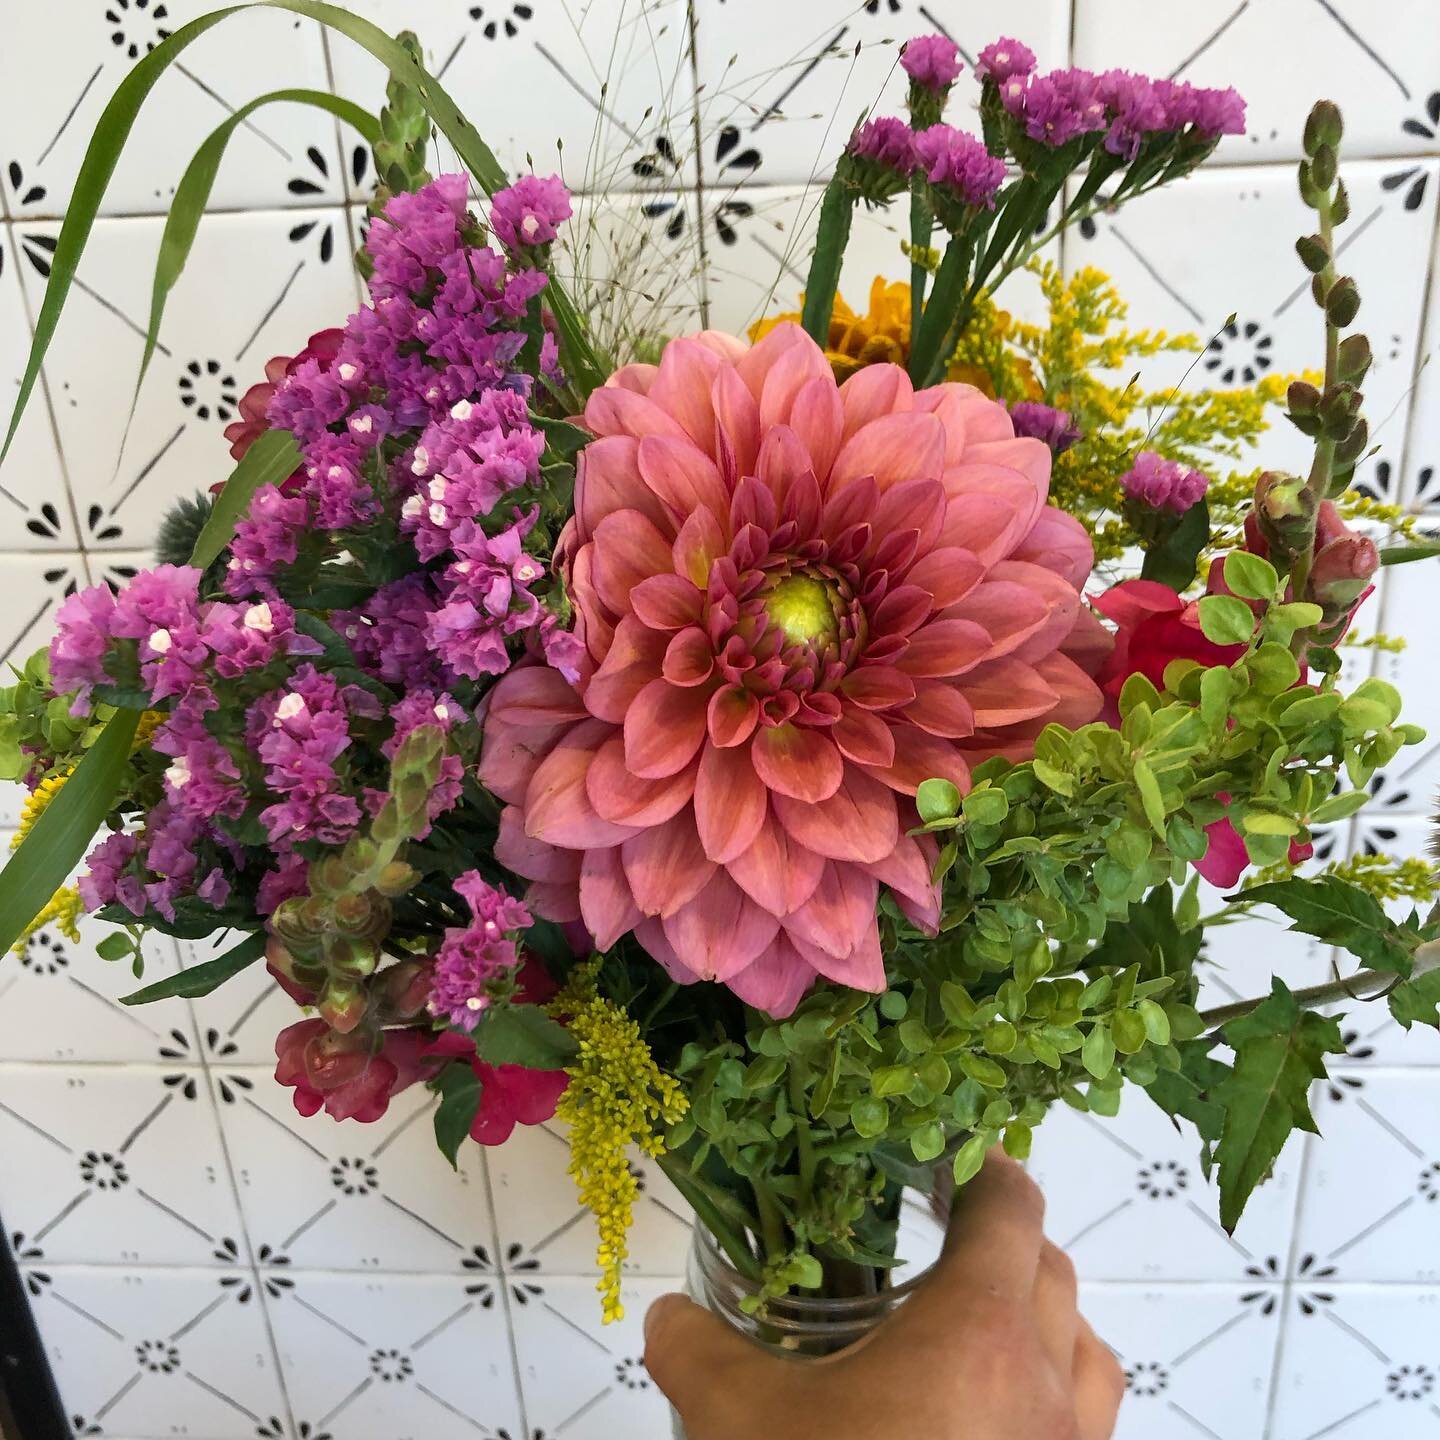 Happy Friday! A couple surprises today including these beautiful bouquets from @gardenwerks_flowerfarm and a limited run of our chocolate cherry sourdough 🍫🍒

Also, caraway rye, roasted garlic &amp; rosemary, cranberry walnut, and sourdough baguett